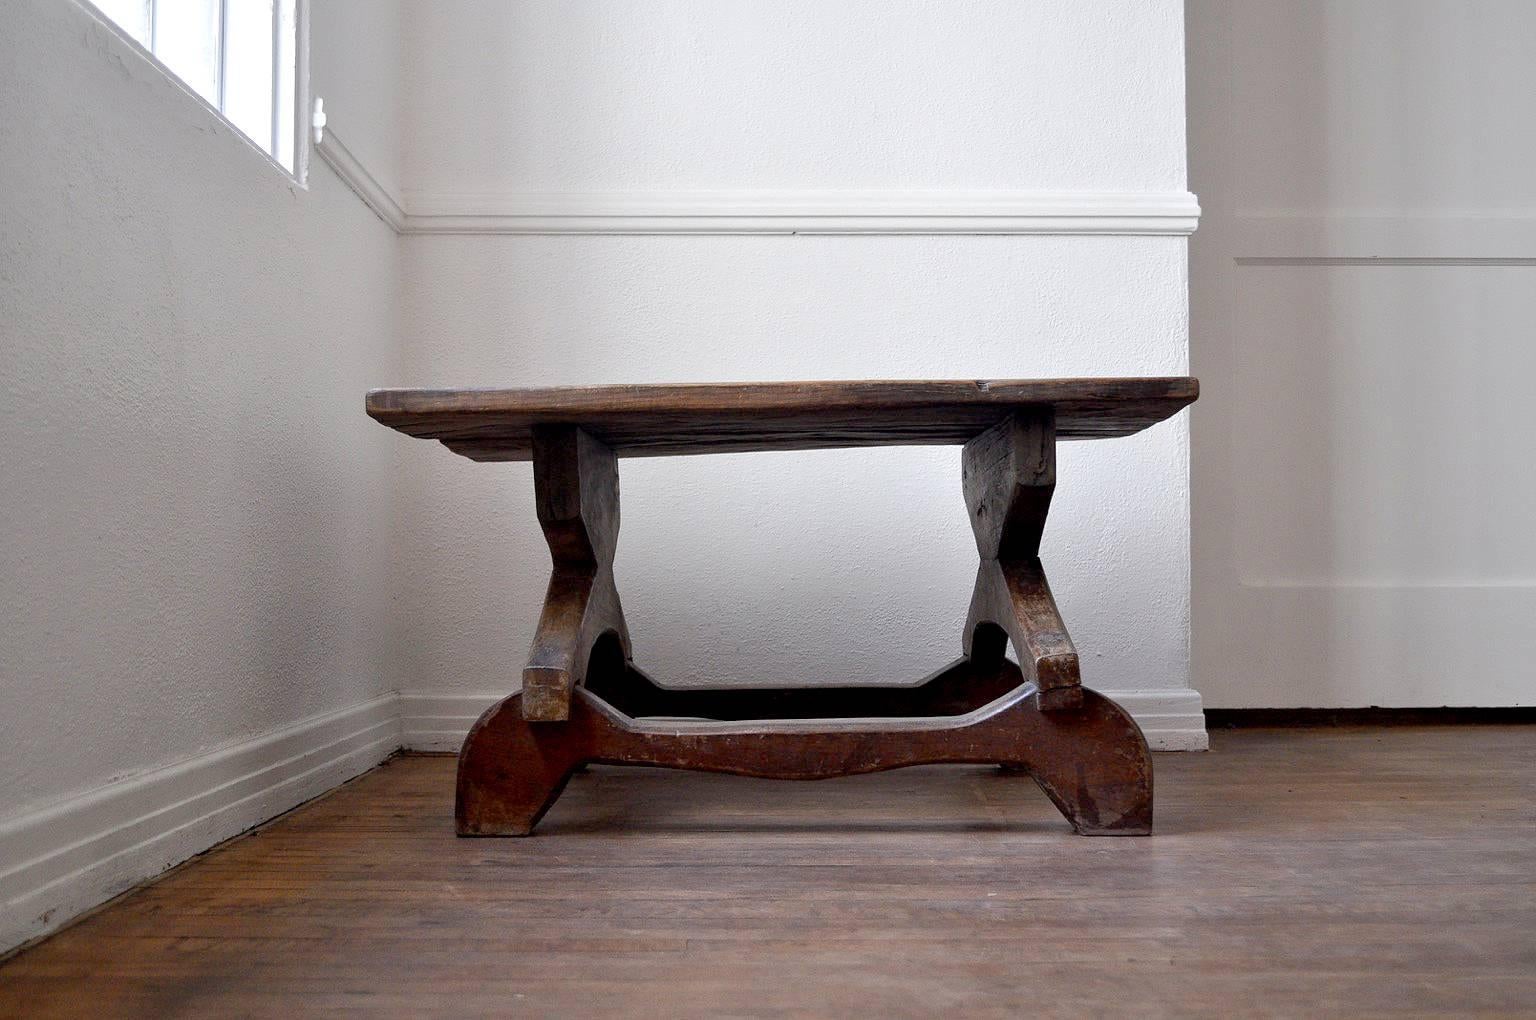 Handmade table from Guatemala. From the collection of Omer Claiborne (Liz Claiborne's brother) in Santa Fe, New Mexico. Part of an extensive collection of Latin American furniture from this period and region. The table has a gorgeous patina and